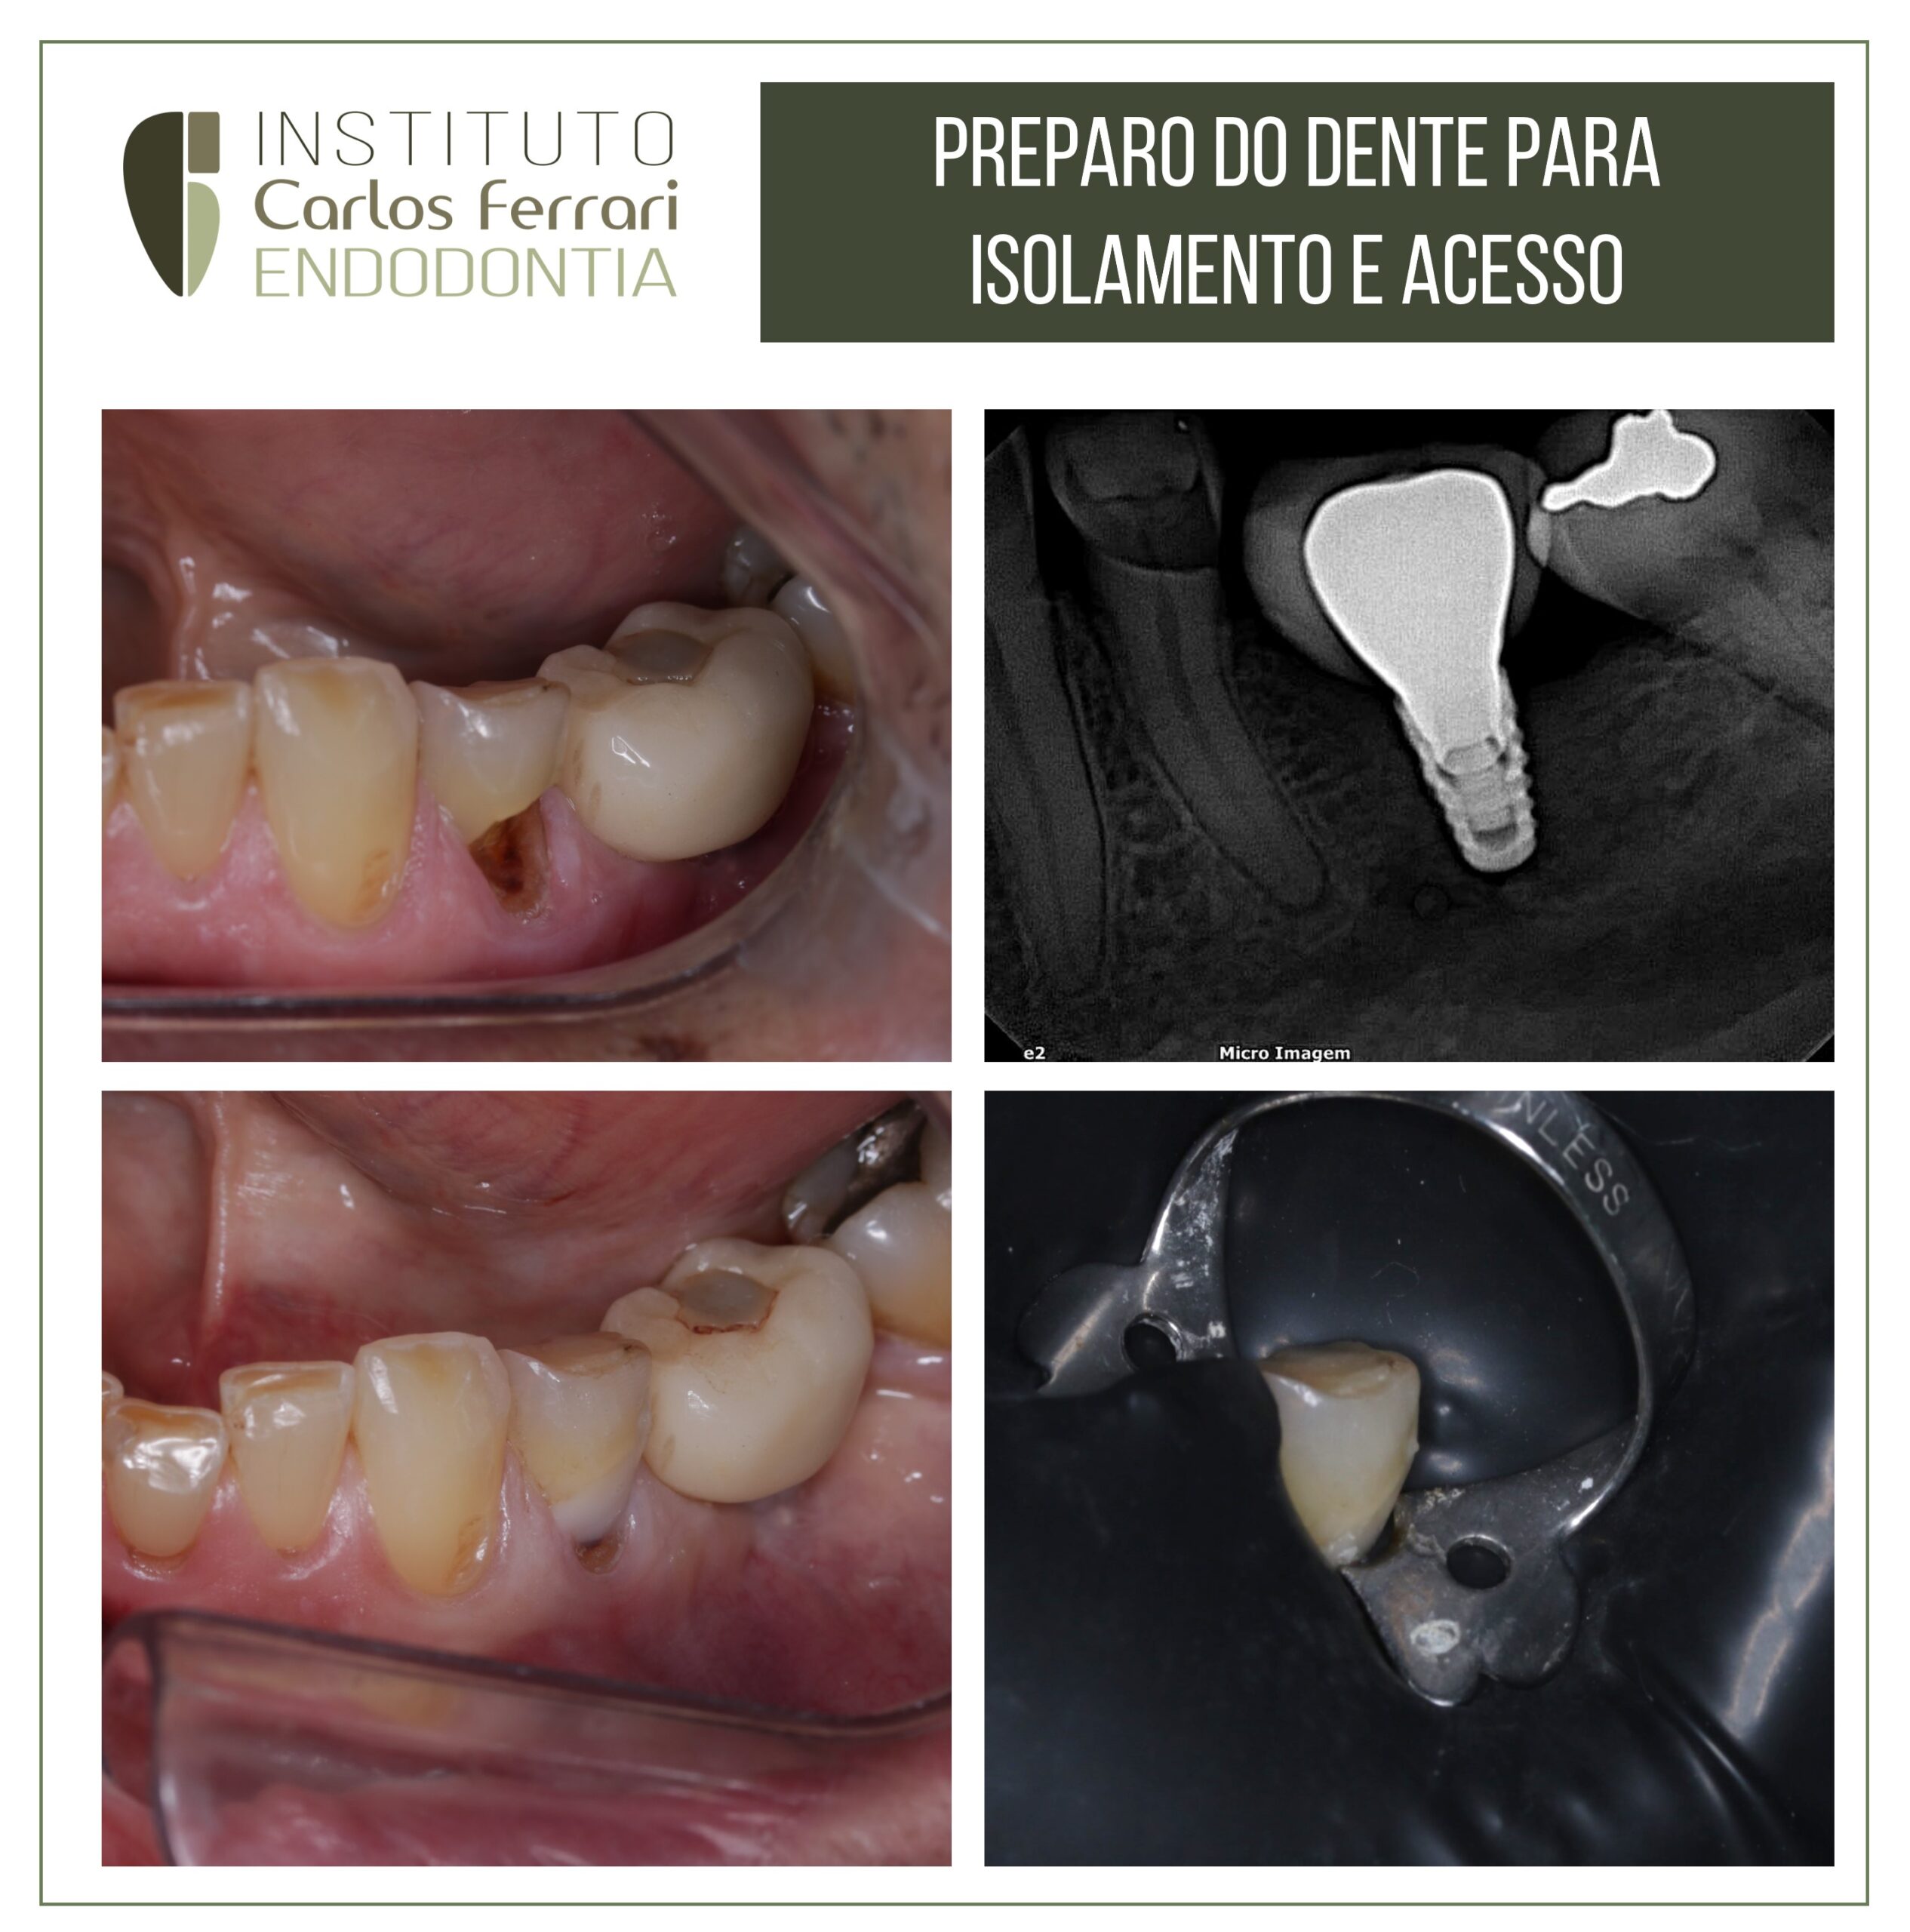 You are currently viewing Tooth preparation for isolation and access surgery.